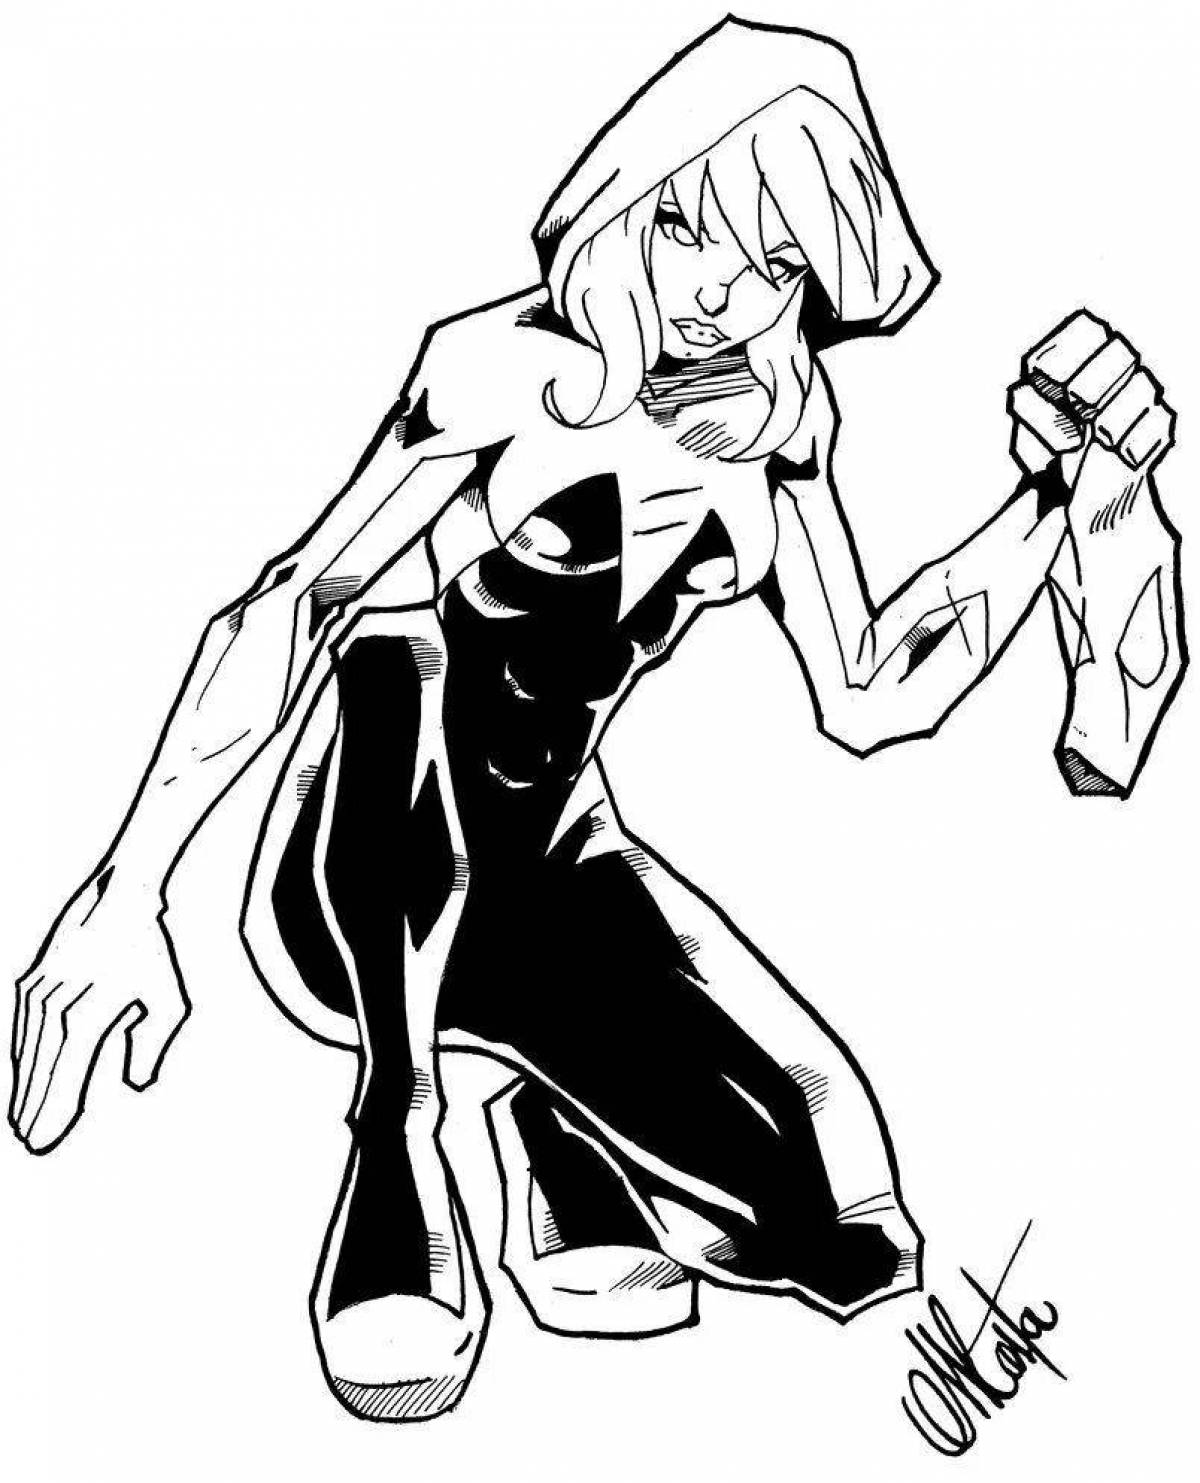 Spider gwen stylish coloring page